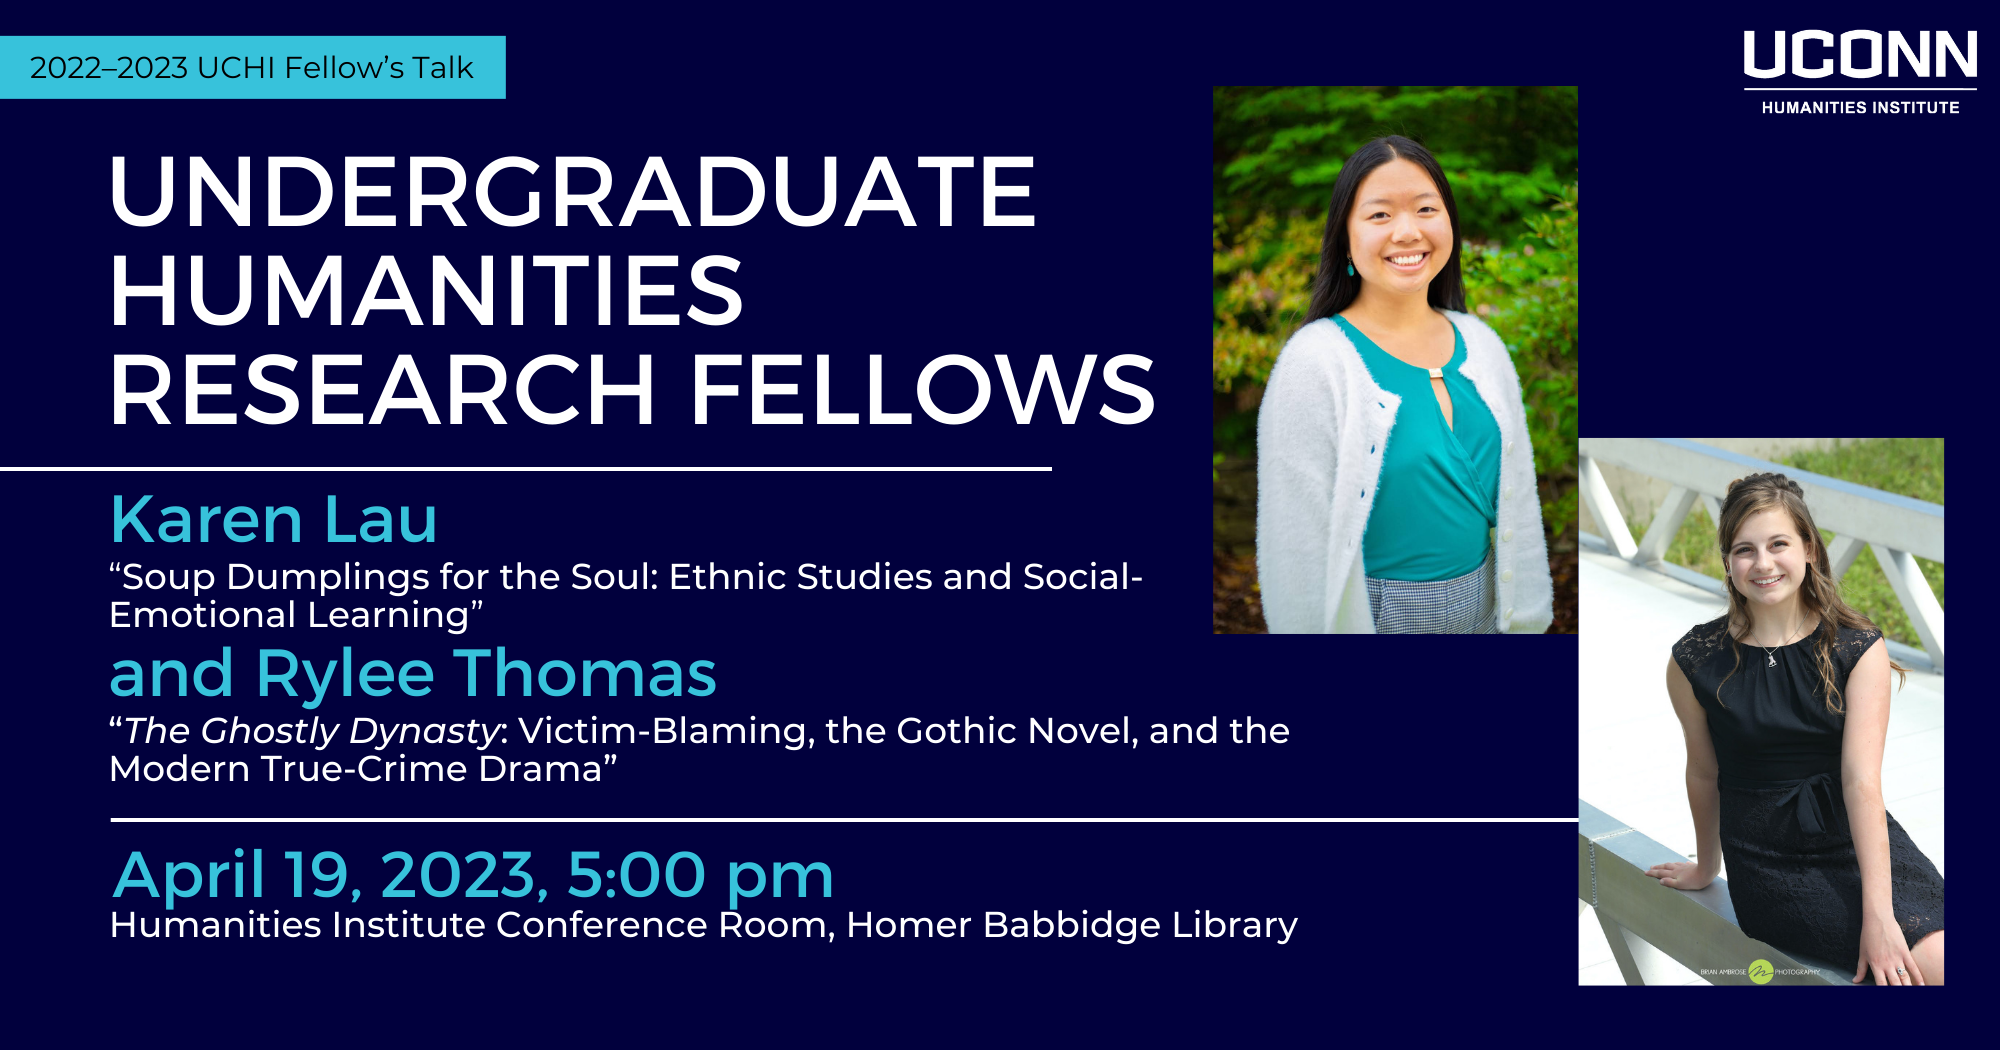 2022-23 UCHI Fellow's Talk. Undergraduate Humanities Research Fellows. Karen Lau, “Soup Dumplings for the Soul: Ethnic Studies and Social-Emotional Learning” and Rylee Thomas, “The Ghostly Dynasty: Victim-Blaming, the Gothic Novel, and the Modern True-Crime Drama”. Wednesday April 19, 2023, 5:00pm, UCHI Conference room, Homer Babbidge Library. This event will also be livestreamed.